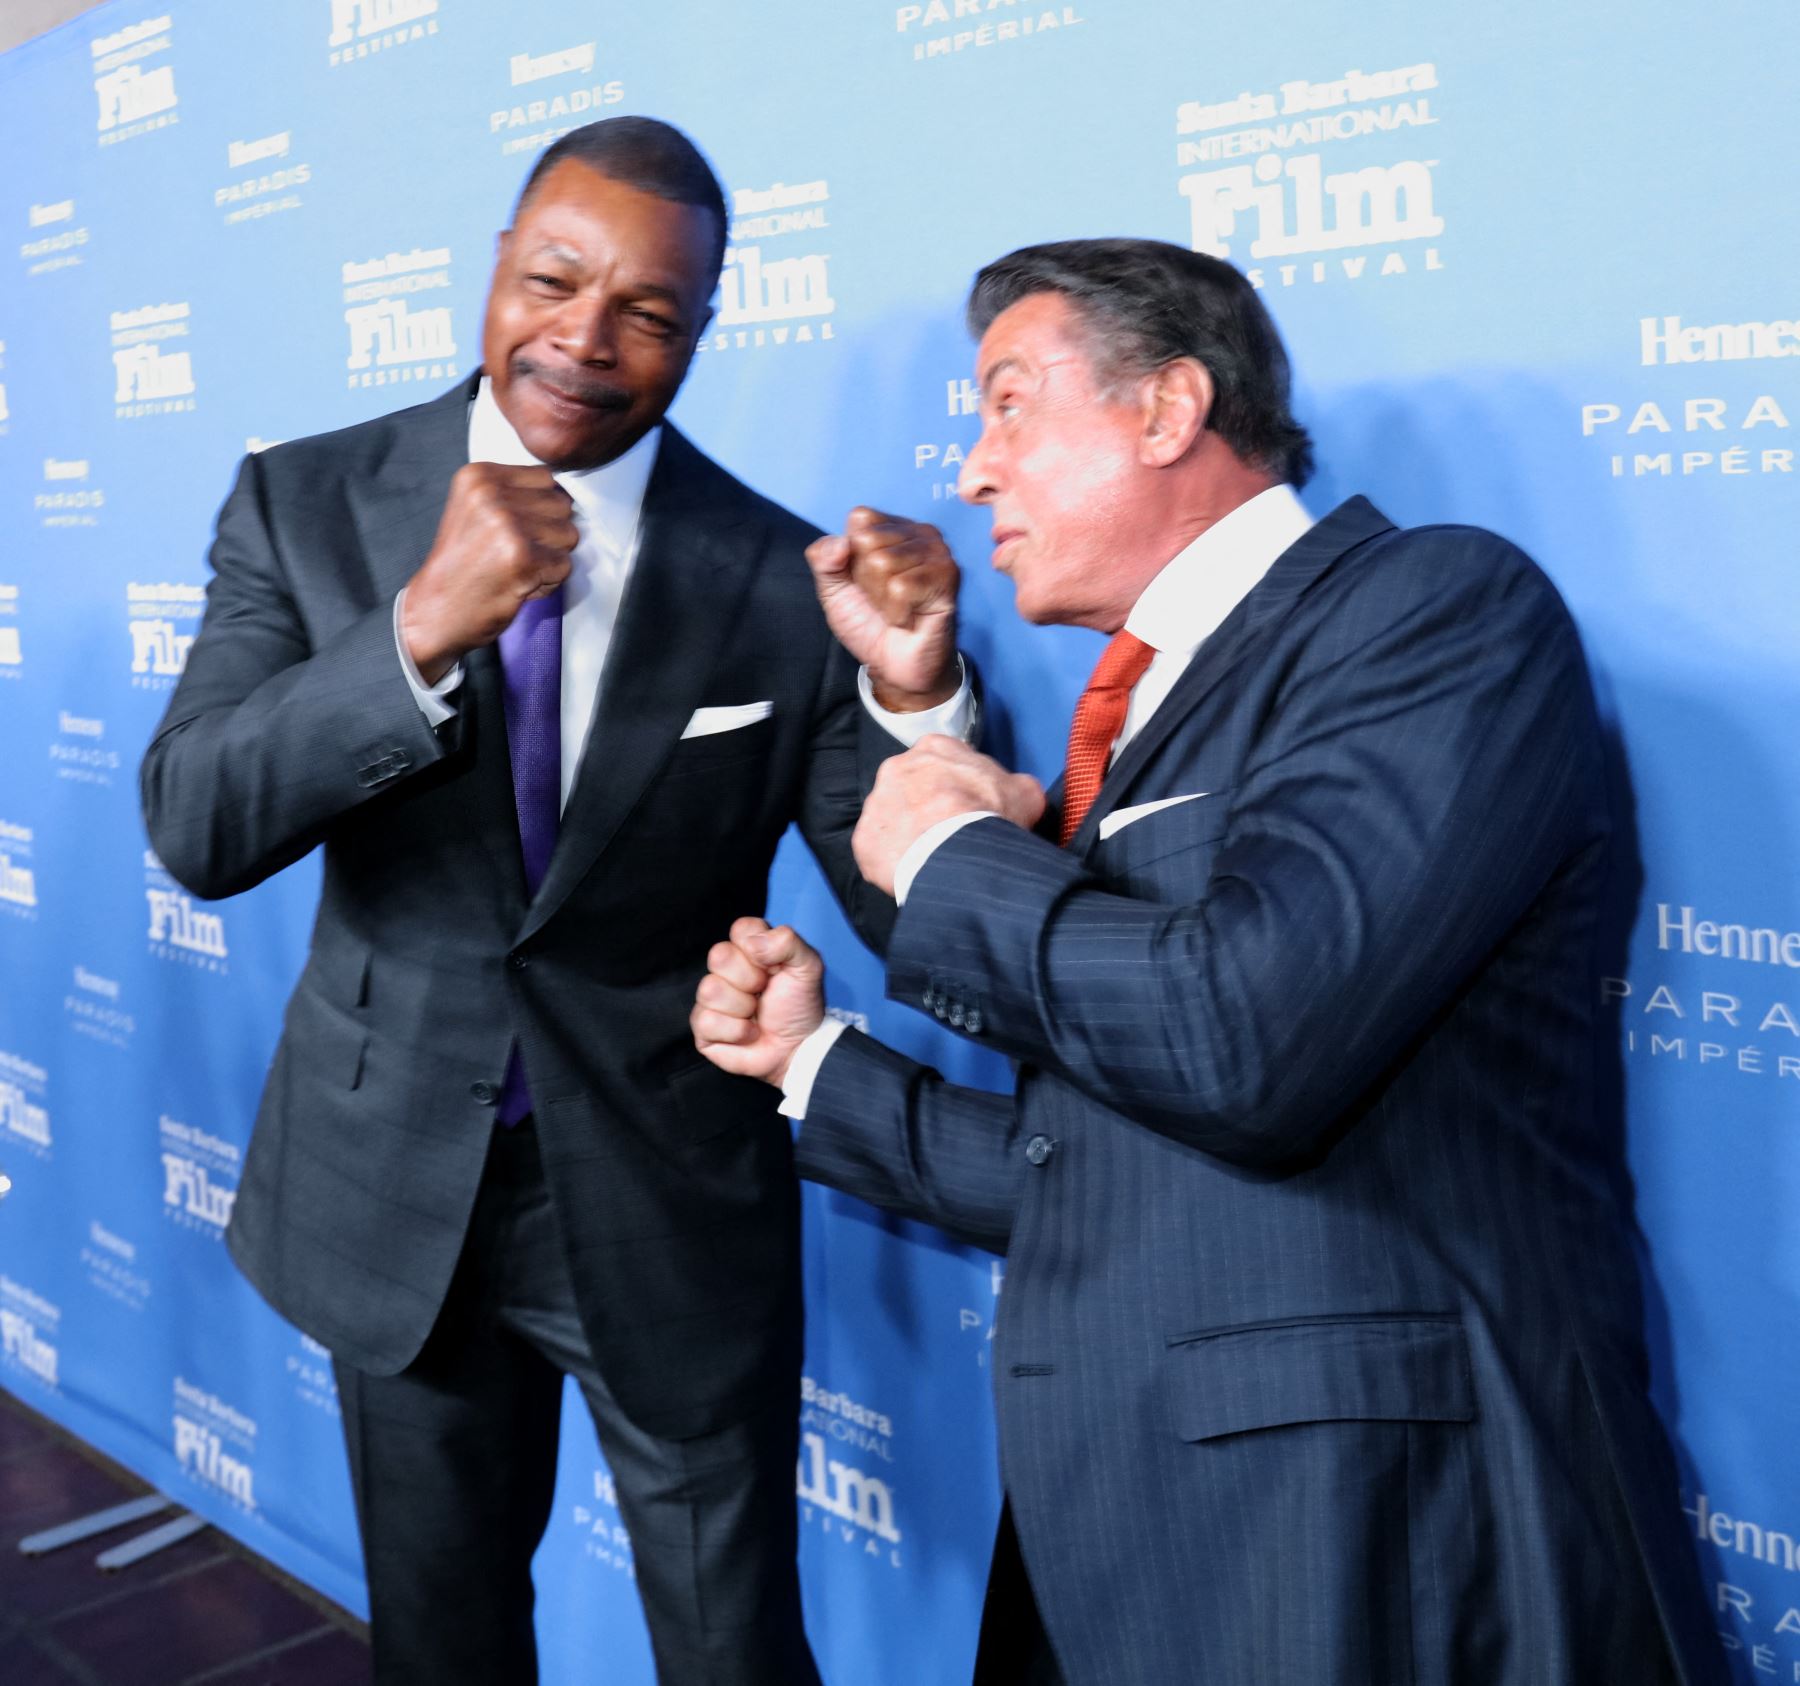 Actor Carl Weathers junto a Sylvester Stallone. Foto: AFP